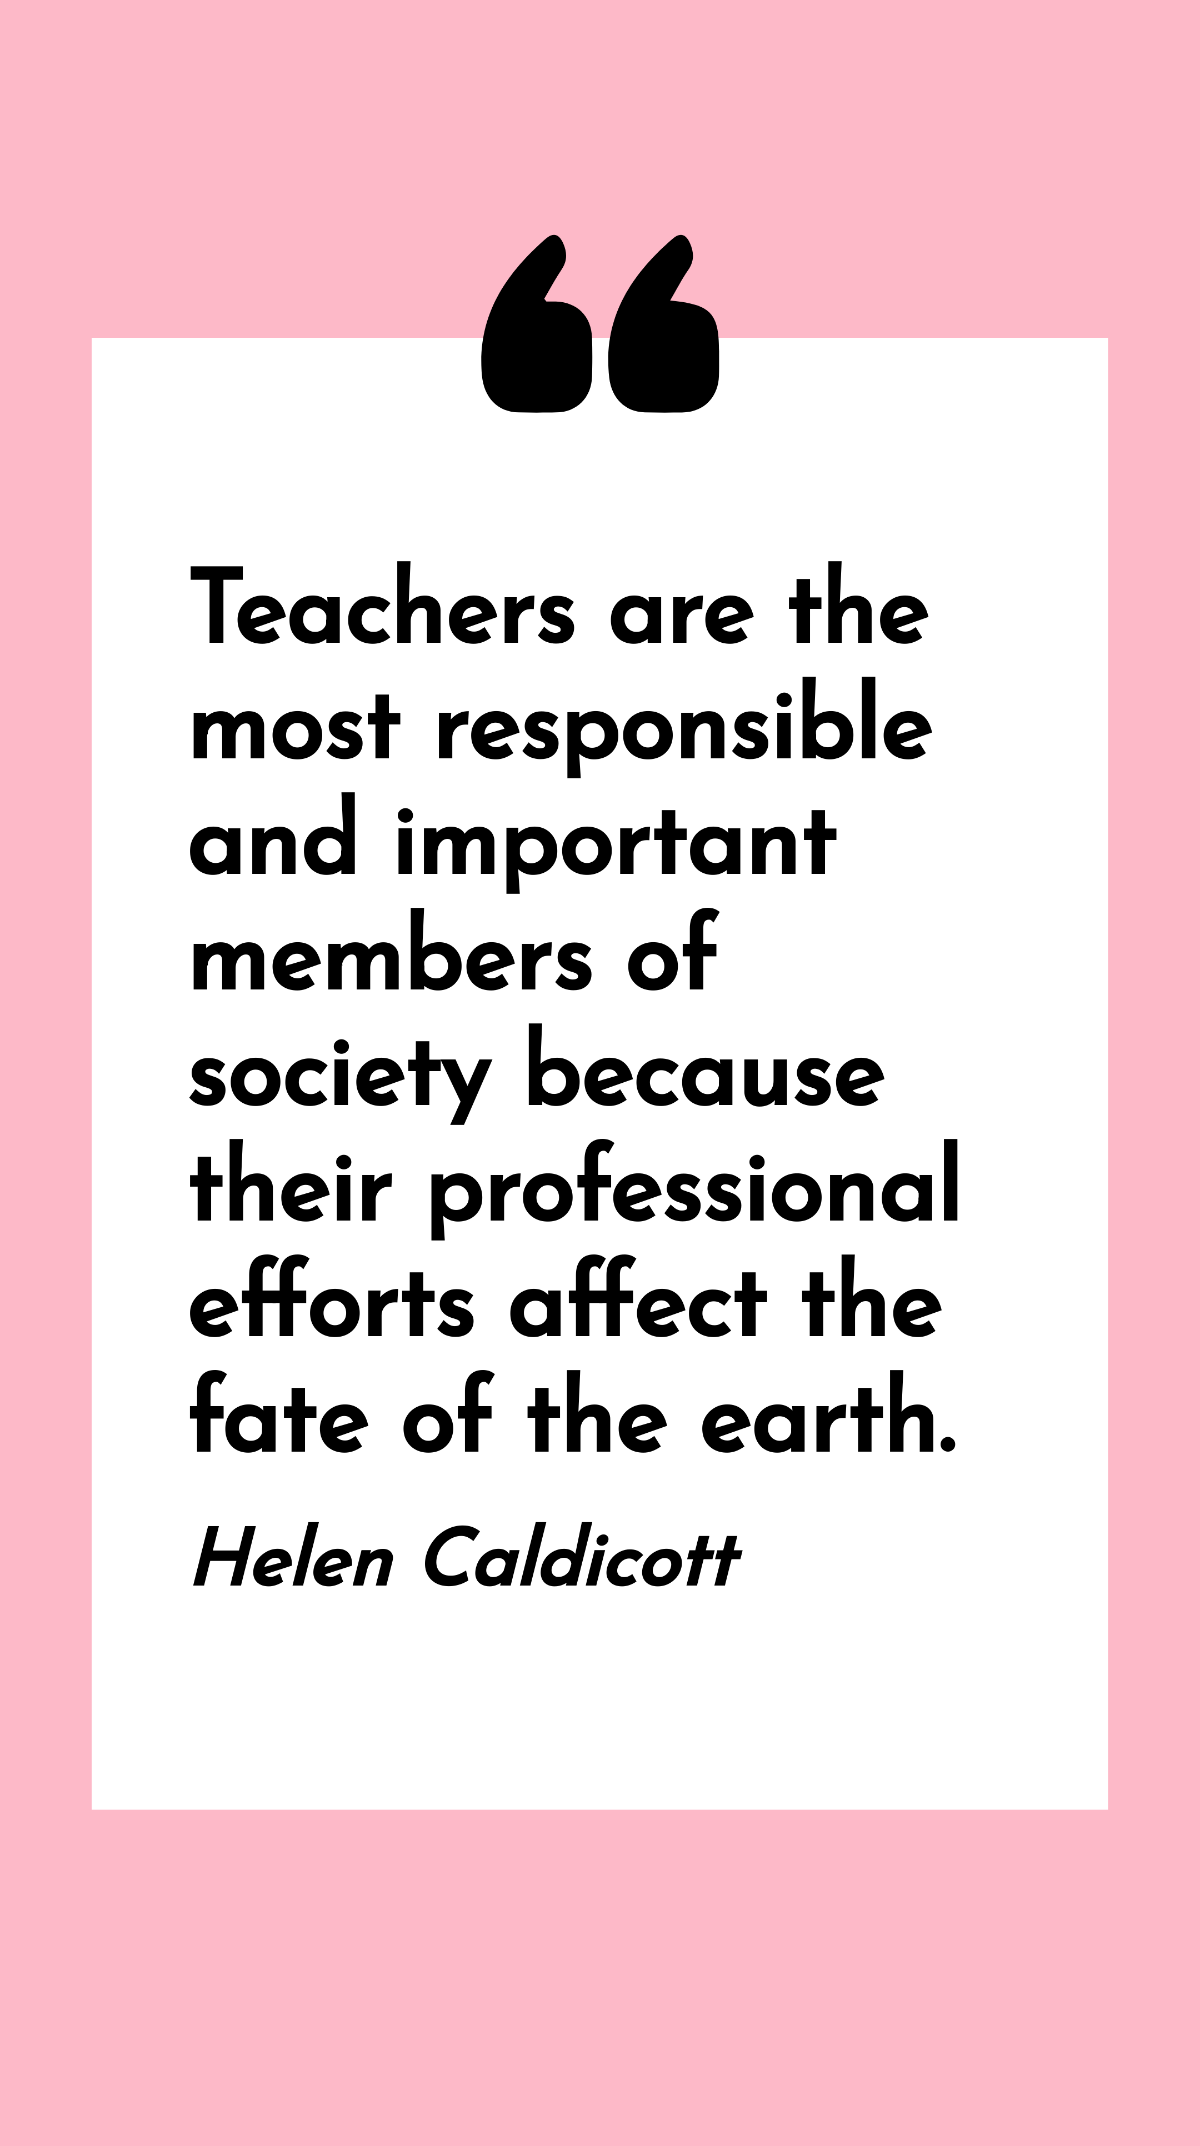 Helen Caldicott - Teachers are the most responsible and important members of society because their professional efforts affect the fate of the earth.